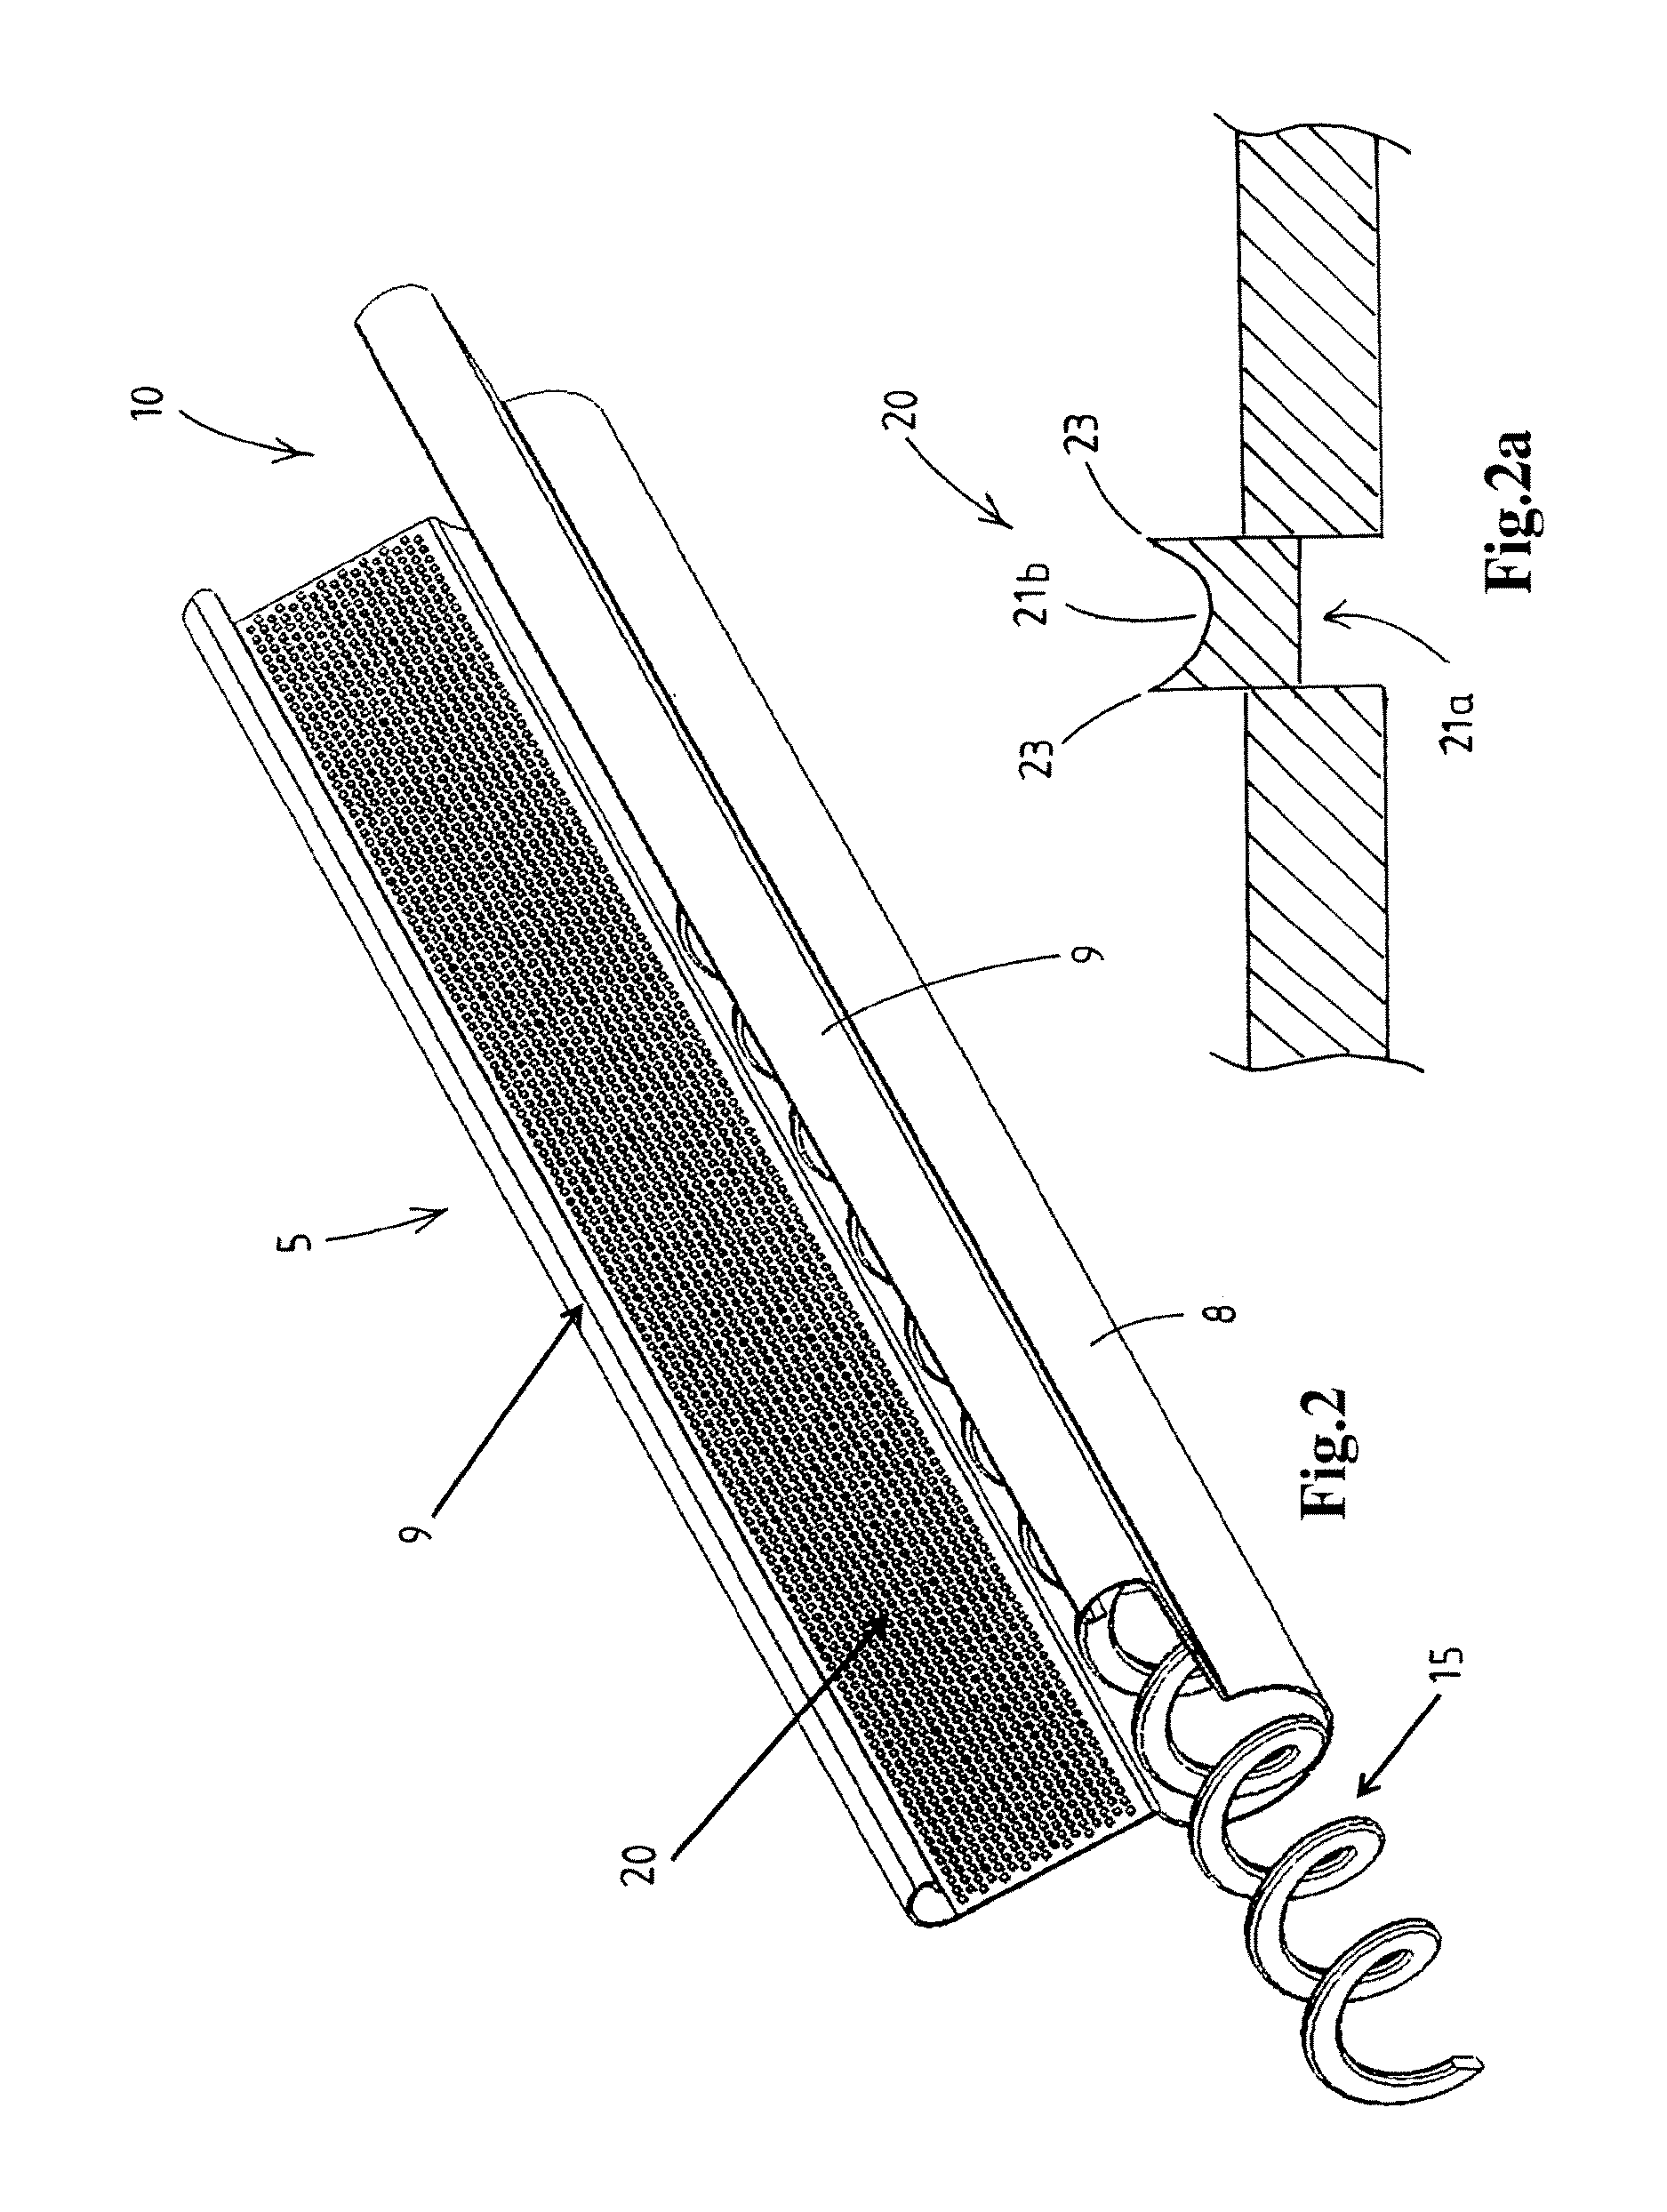 Poultry feeding system having walls which delimit or extend through a feeding space at least partly provided with sharp-edged line-elevations